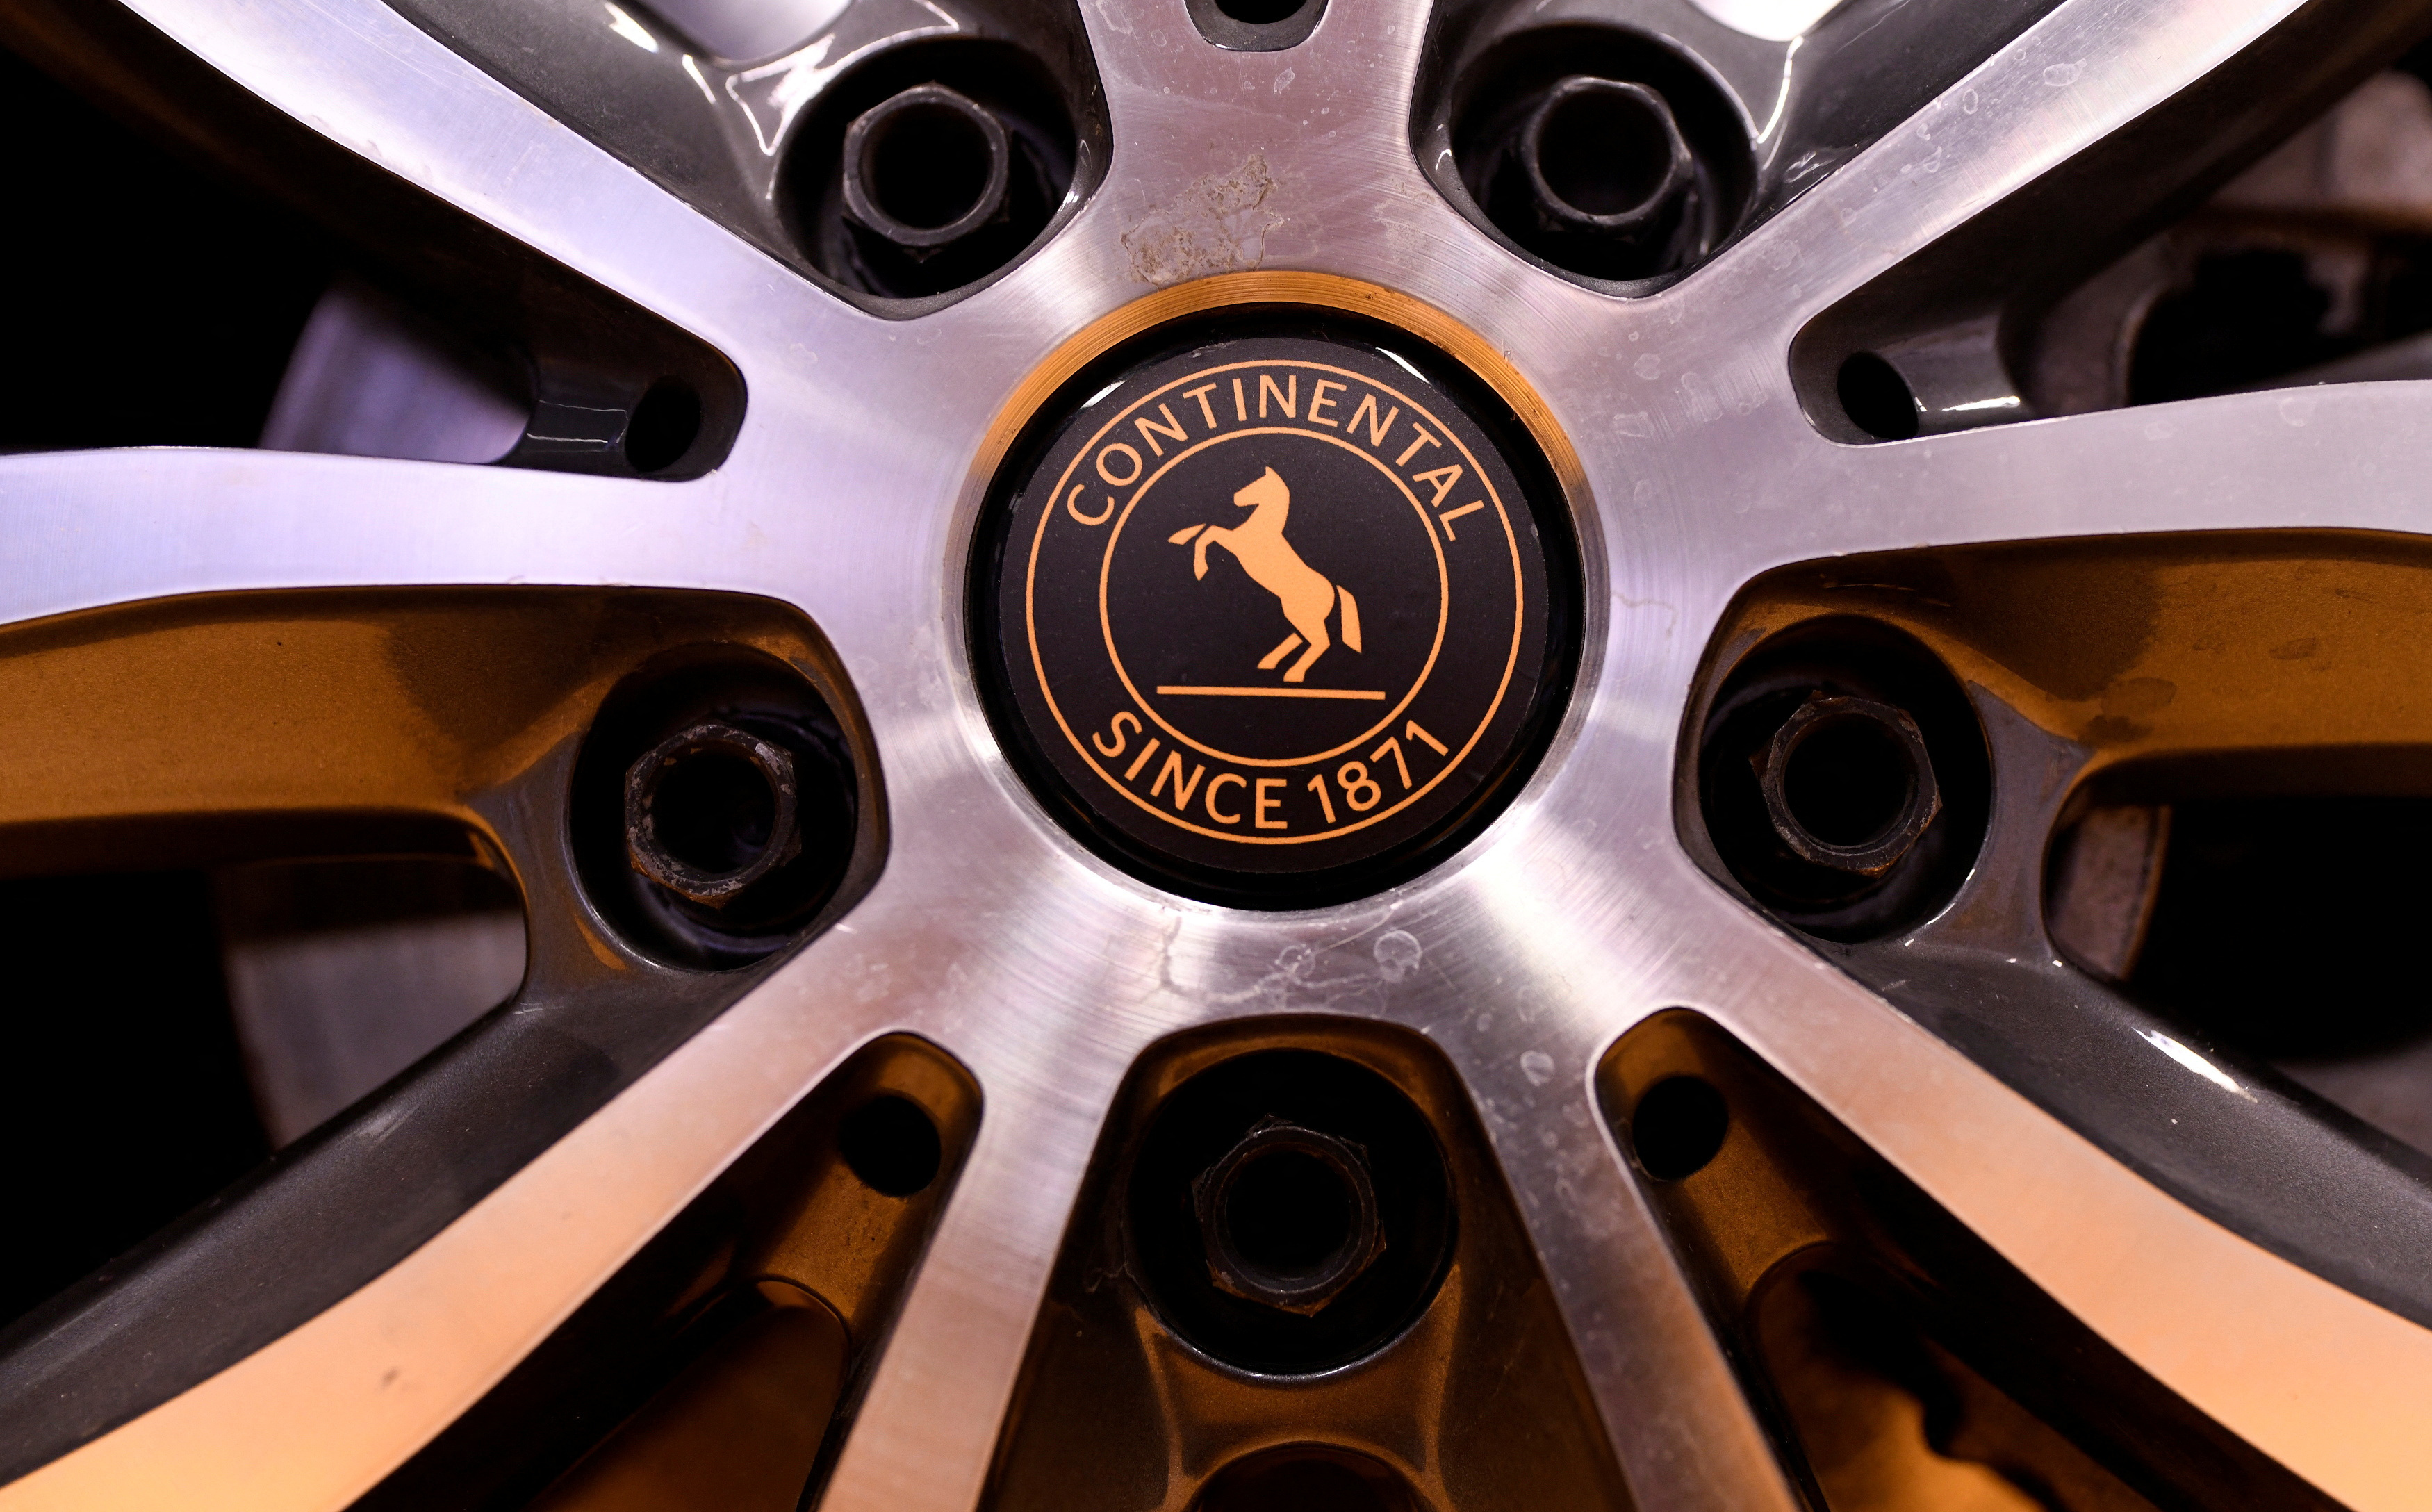 A car wheel with a badge showing the logo of German tyre company Continental